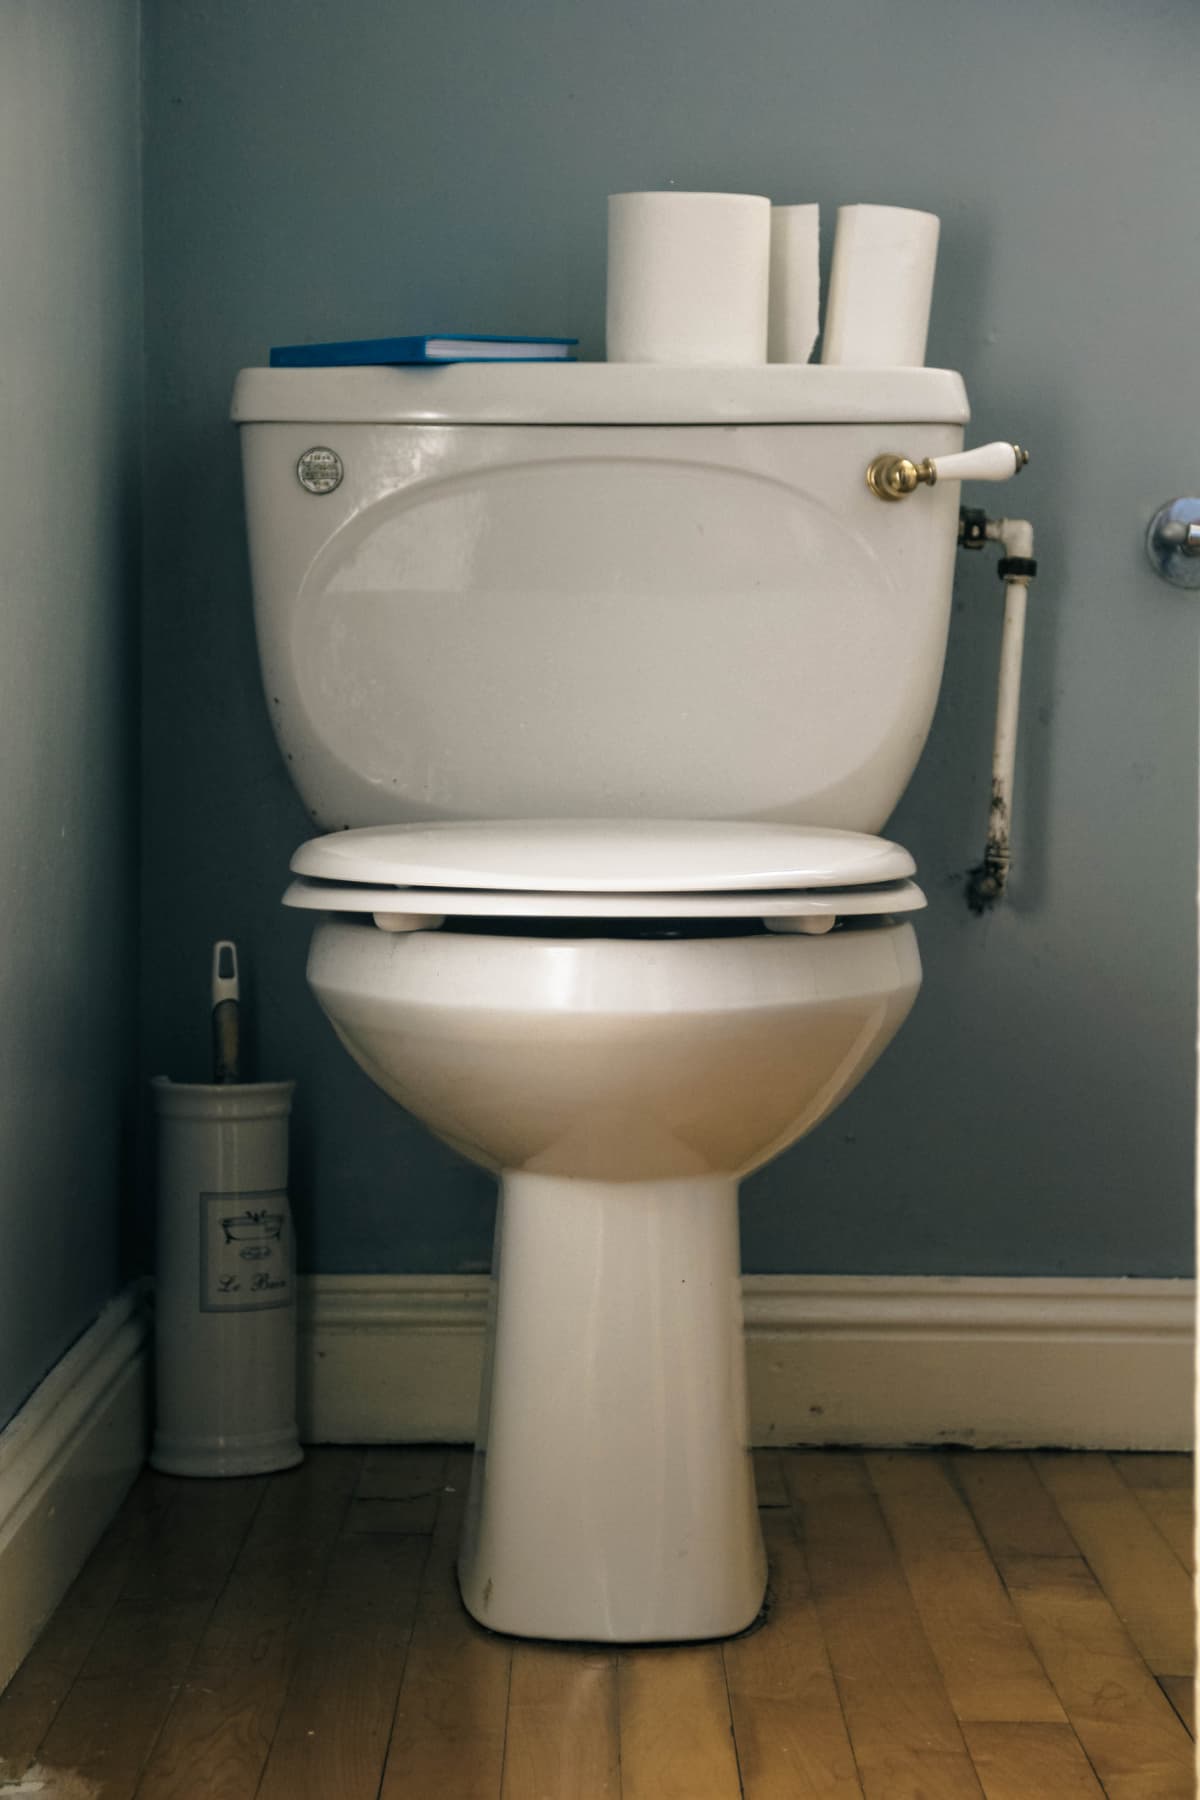 Toilet in the household